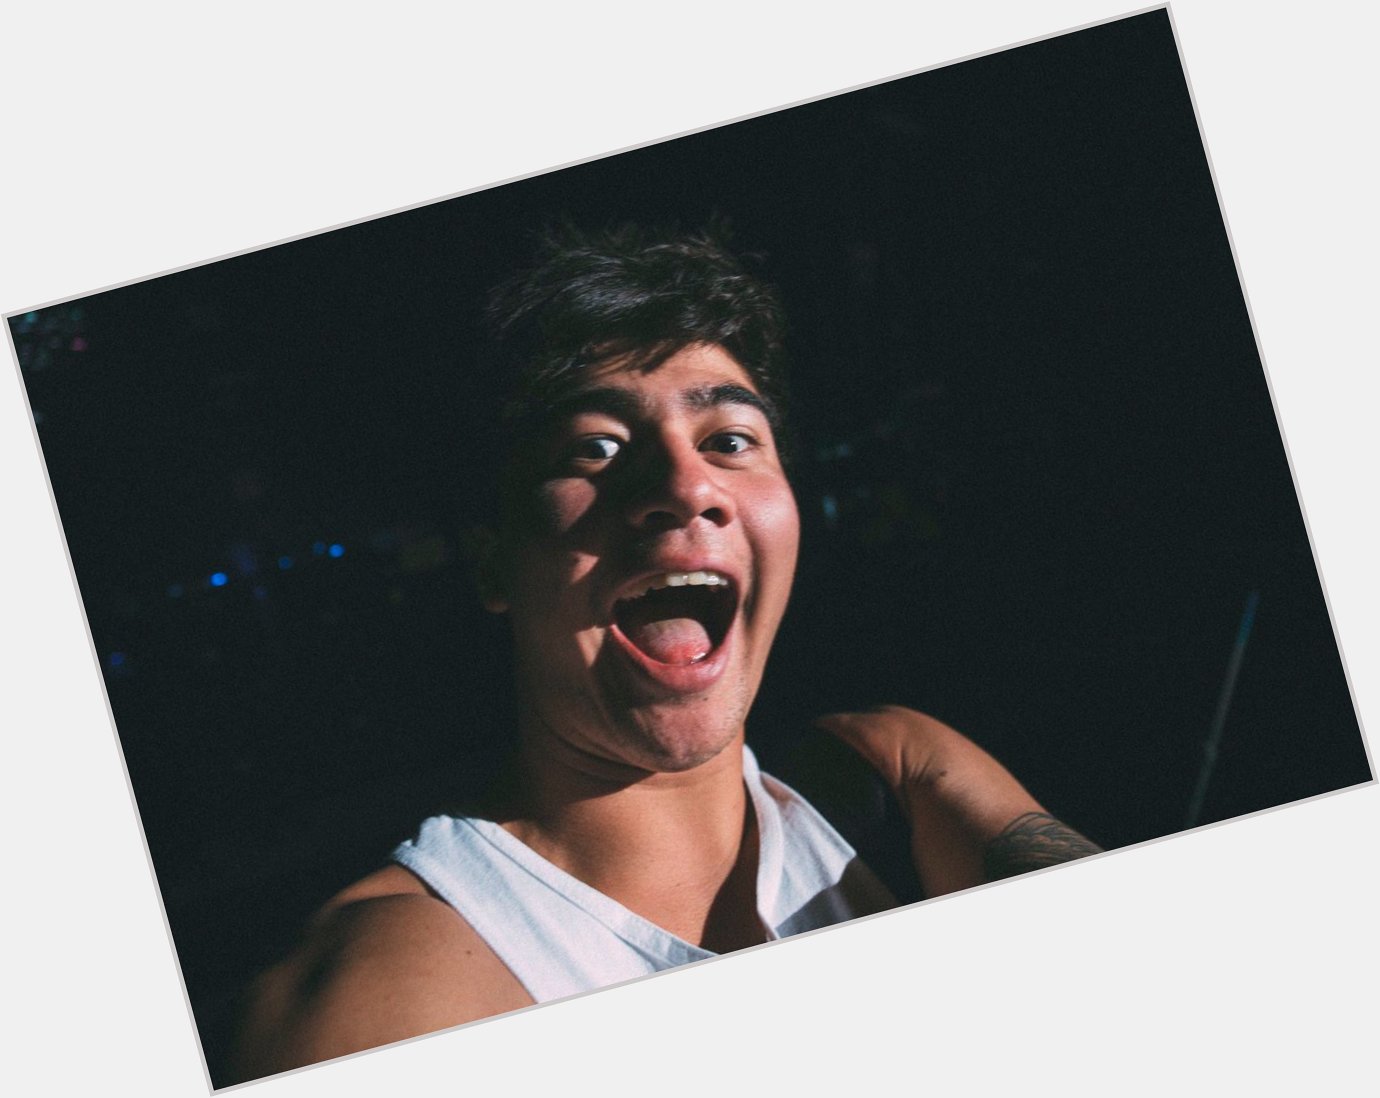 Happy Birthday Calum Hood! Iloveyousomuch! Take care! More birthdays and blessings to come!   